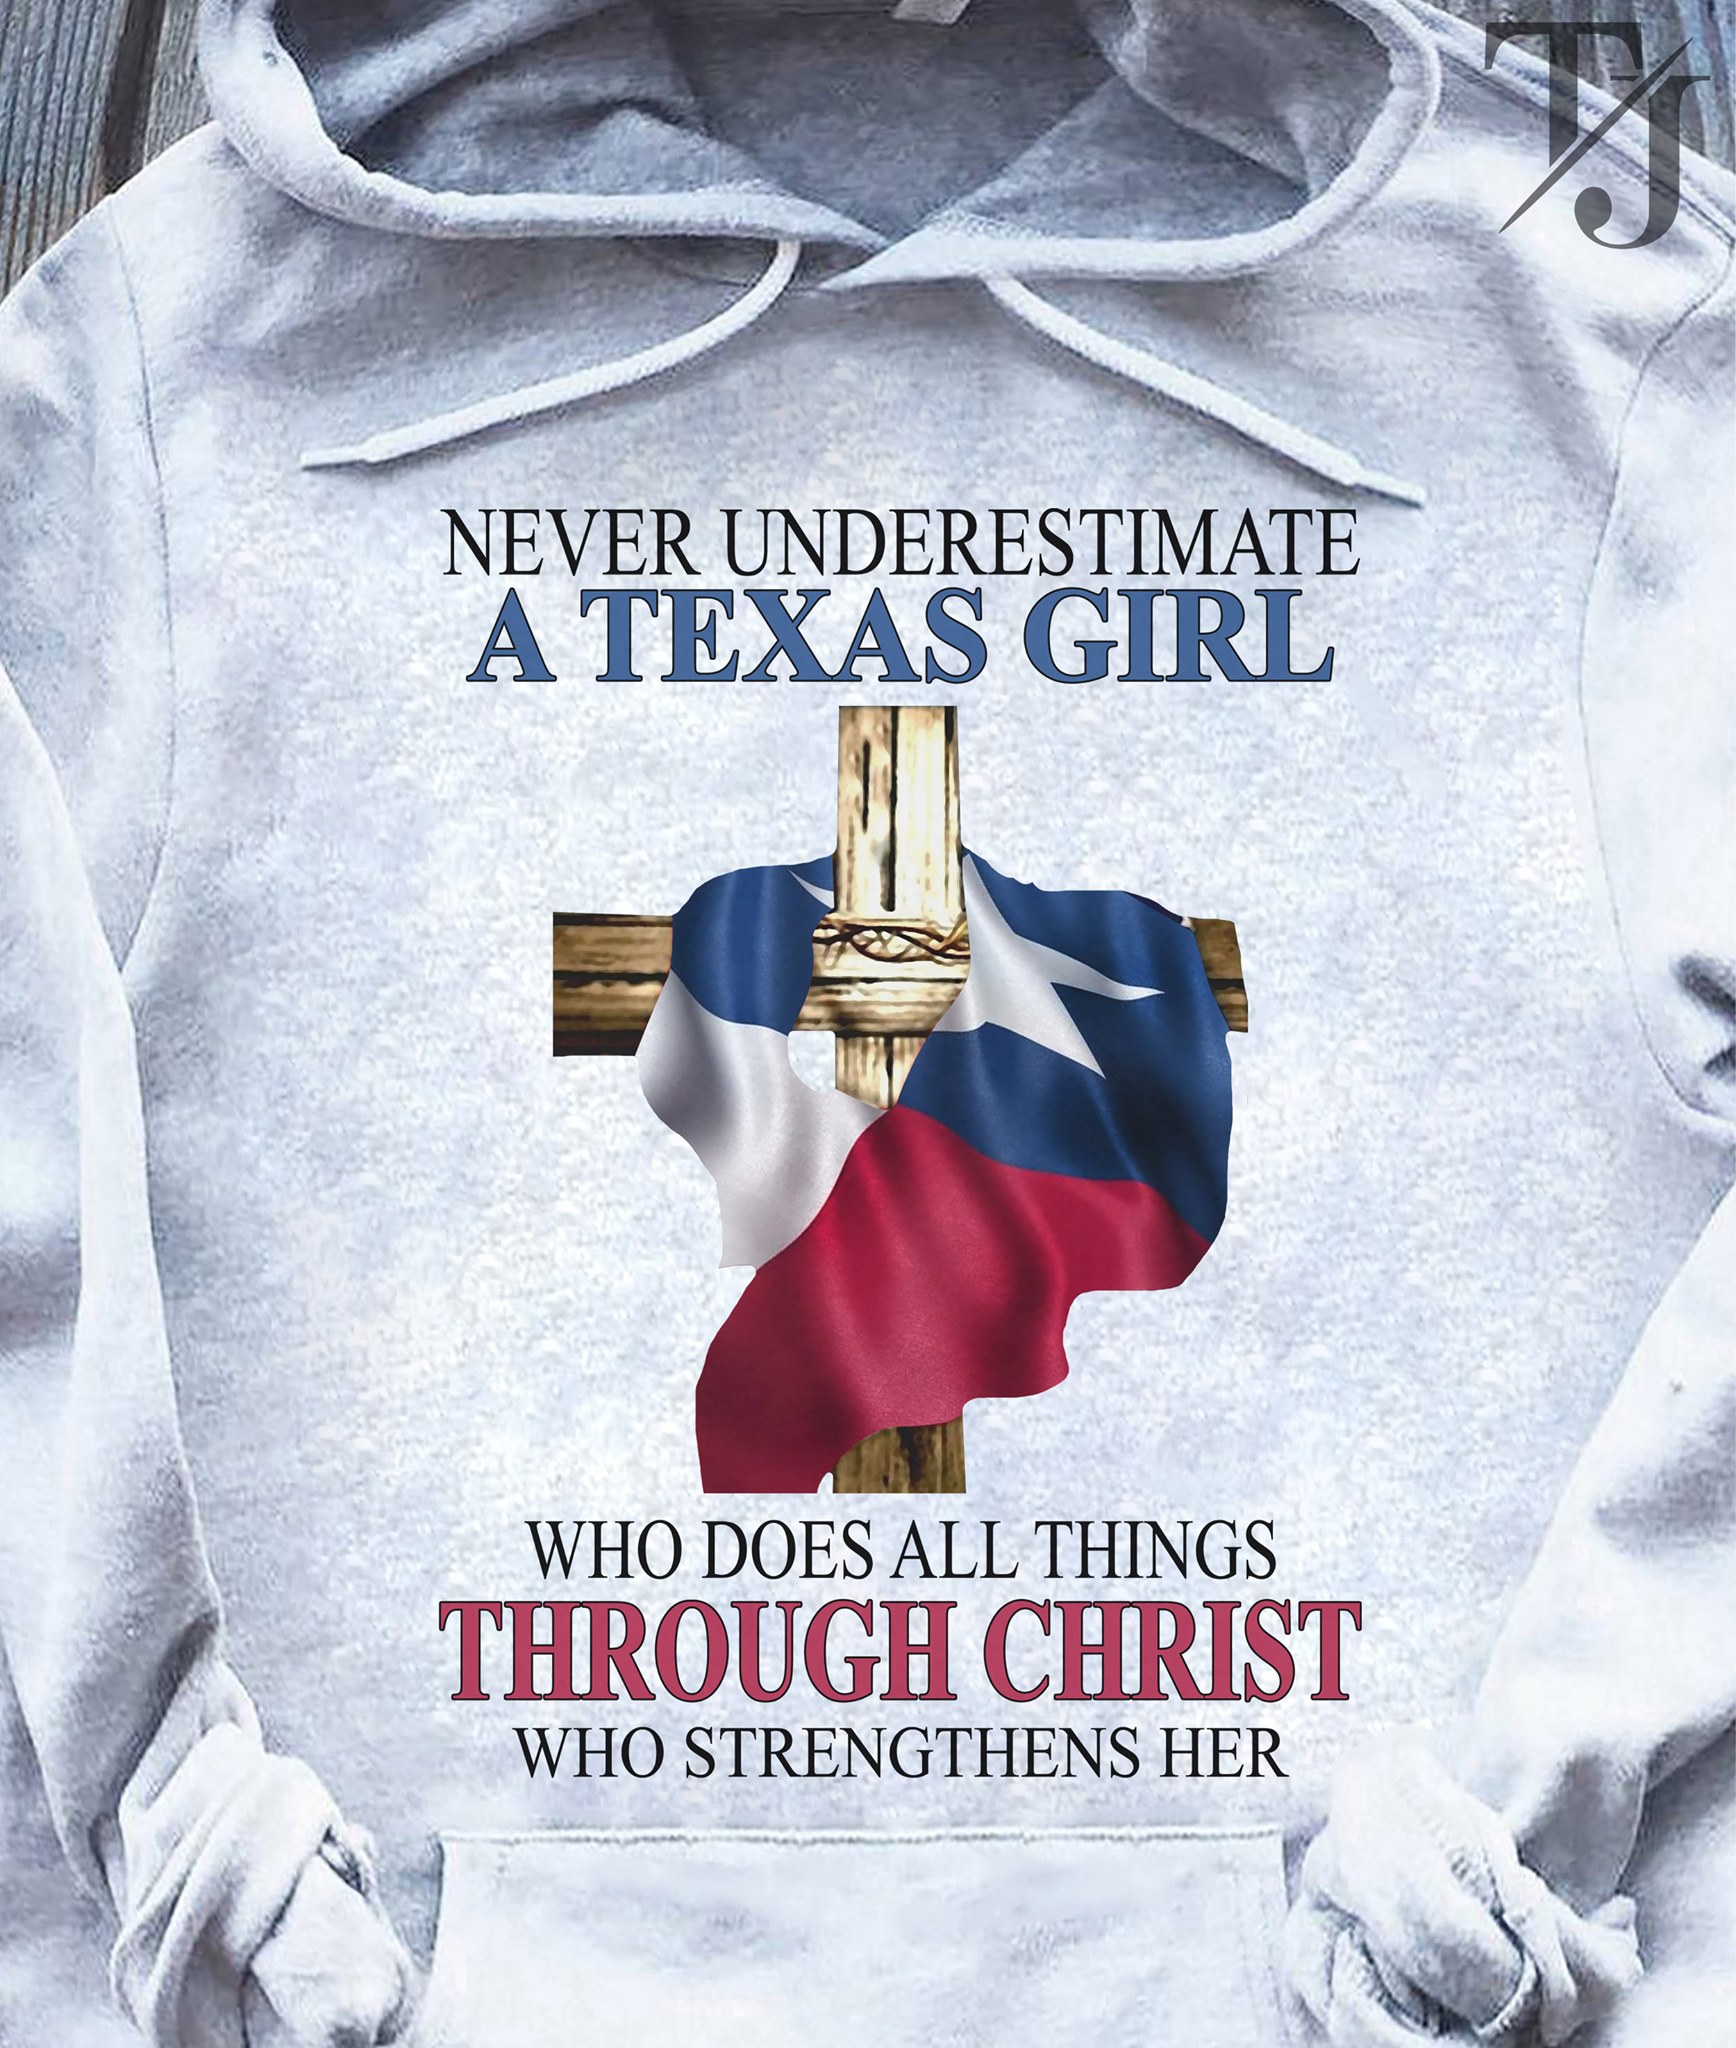 Never underestimate a texas girl who does all things through christ who strengthens her